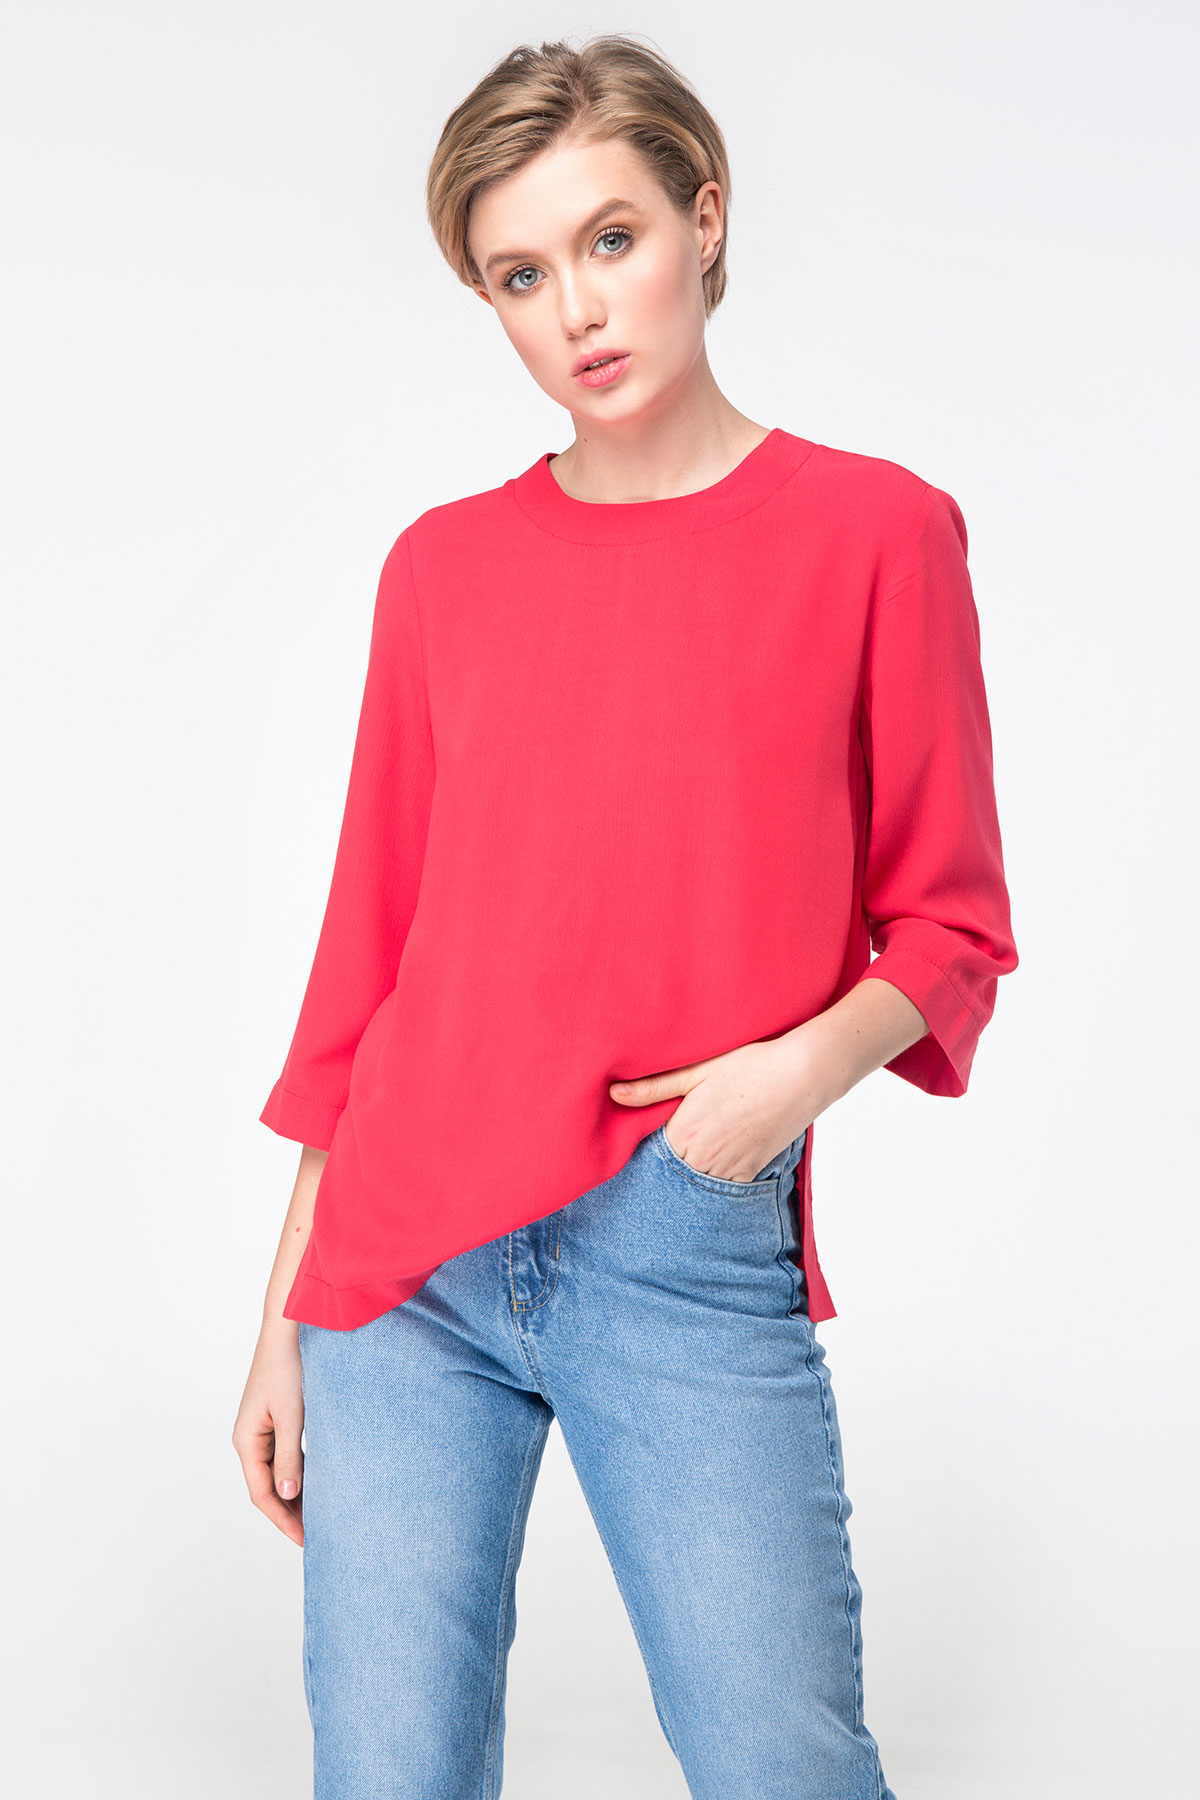 Free red top, photo 5